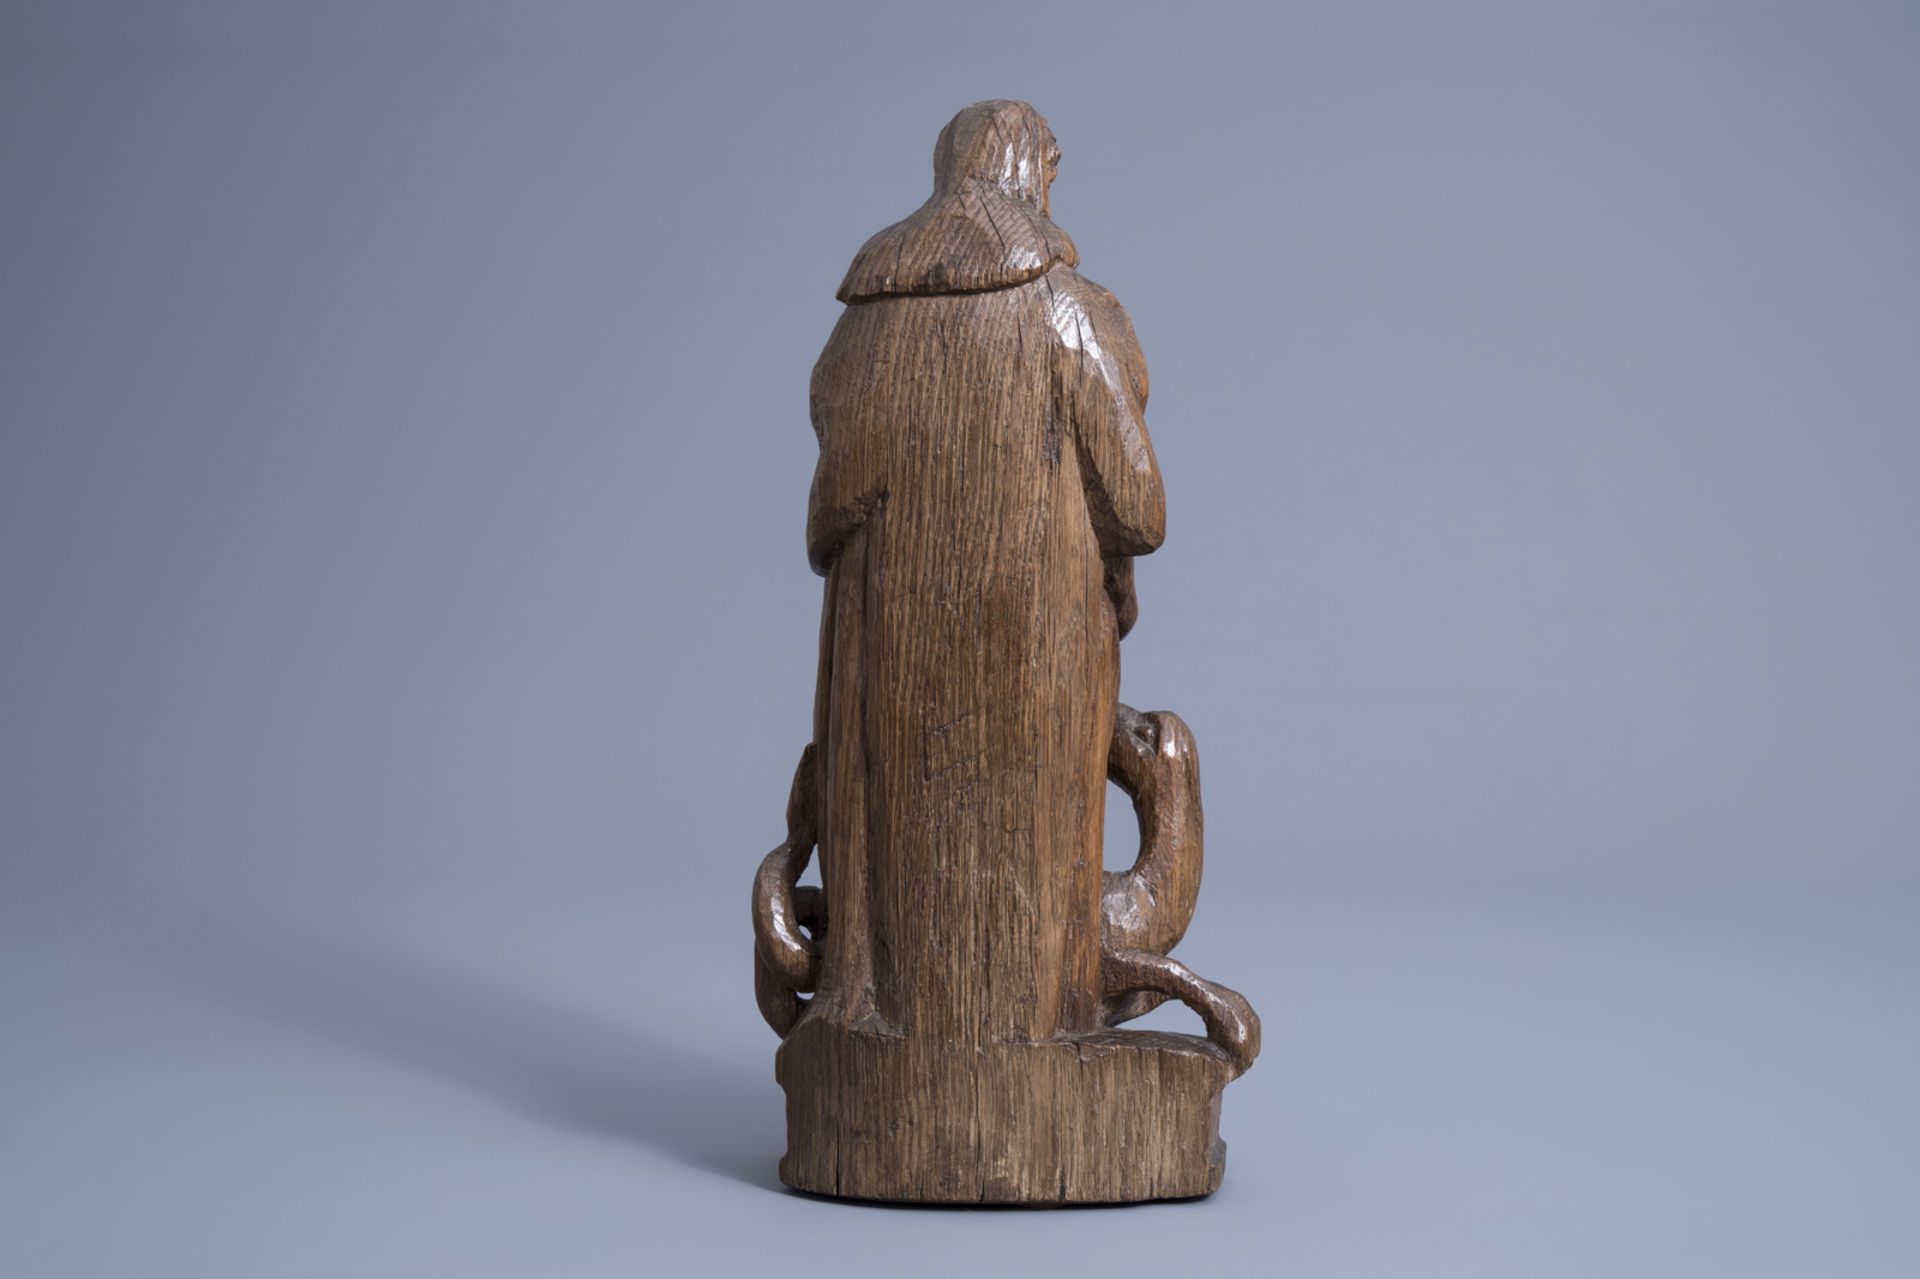 A carved oak wooden figure of Saint Marina the Great Martyr, Southern Netherlands, Flanders, 16th C. - Image 4 of 7